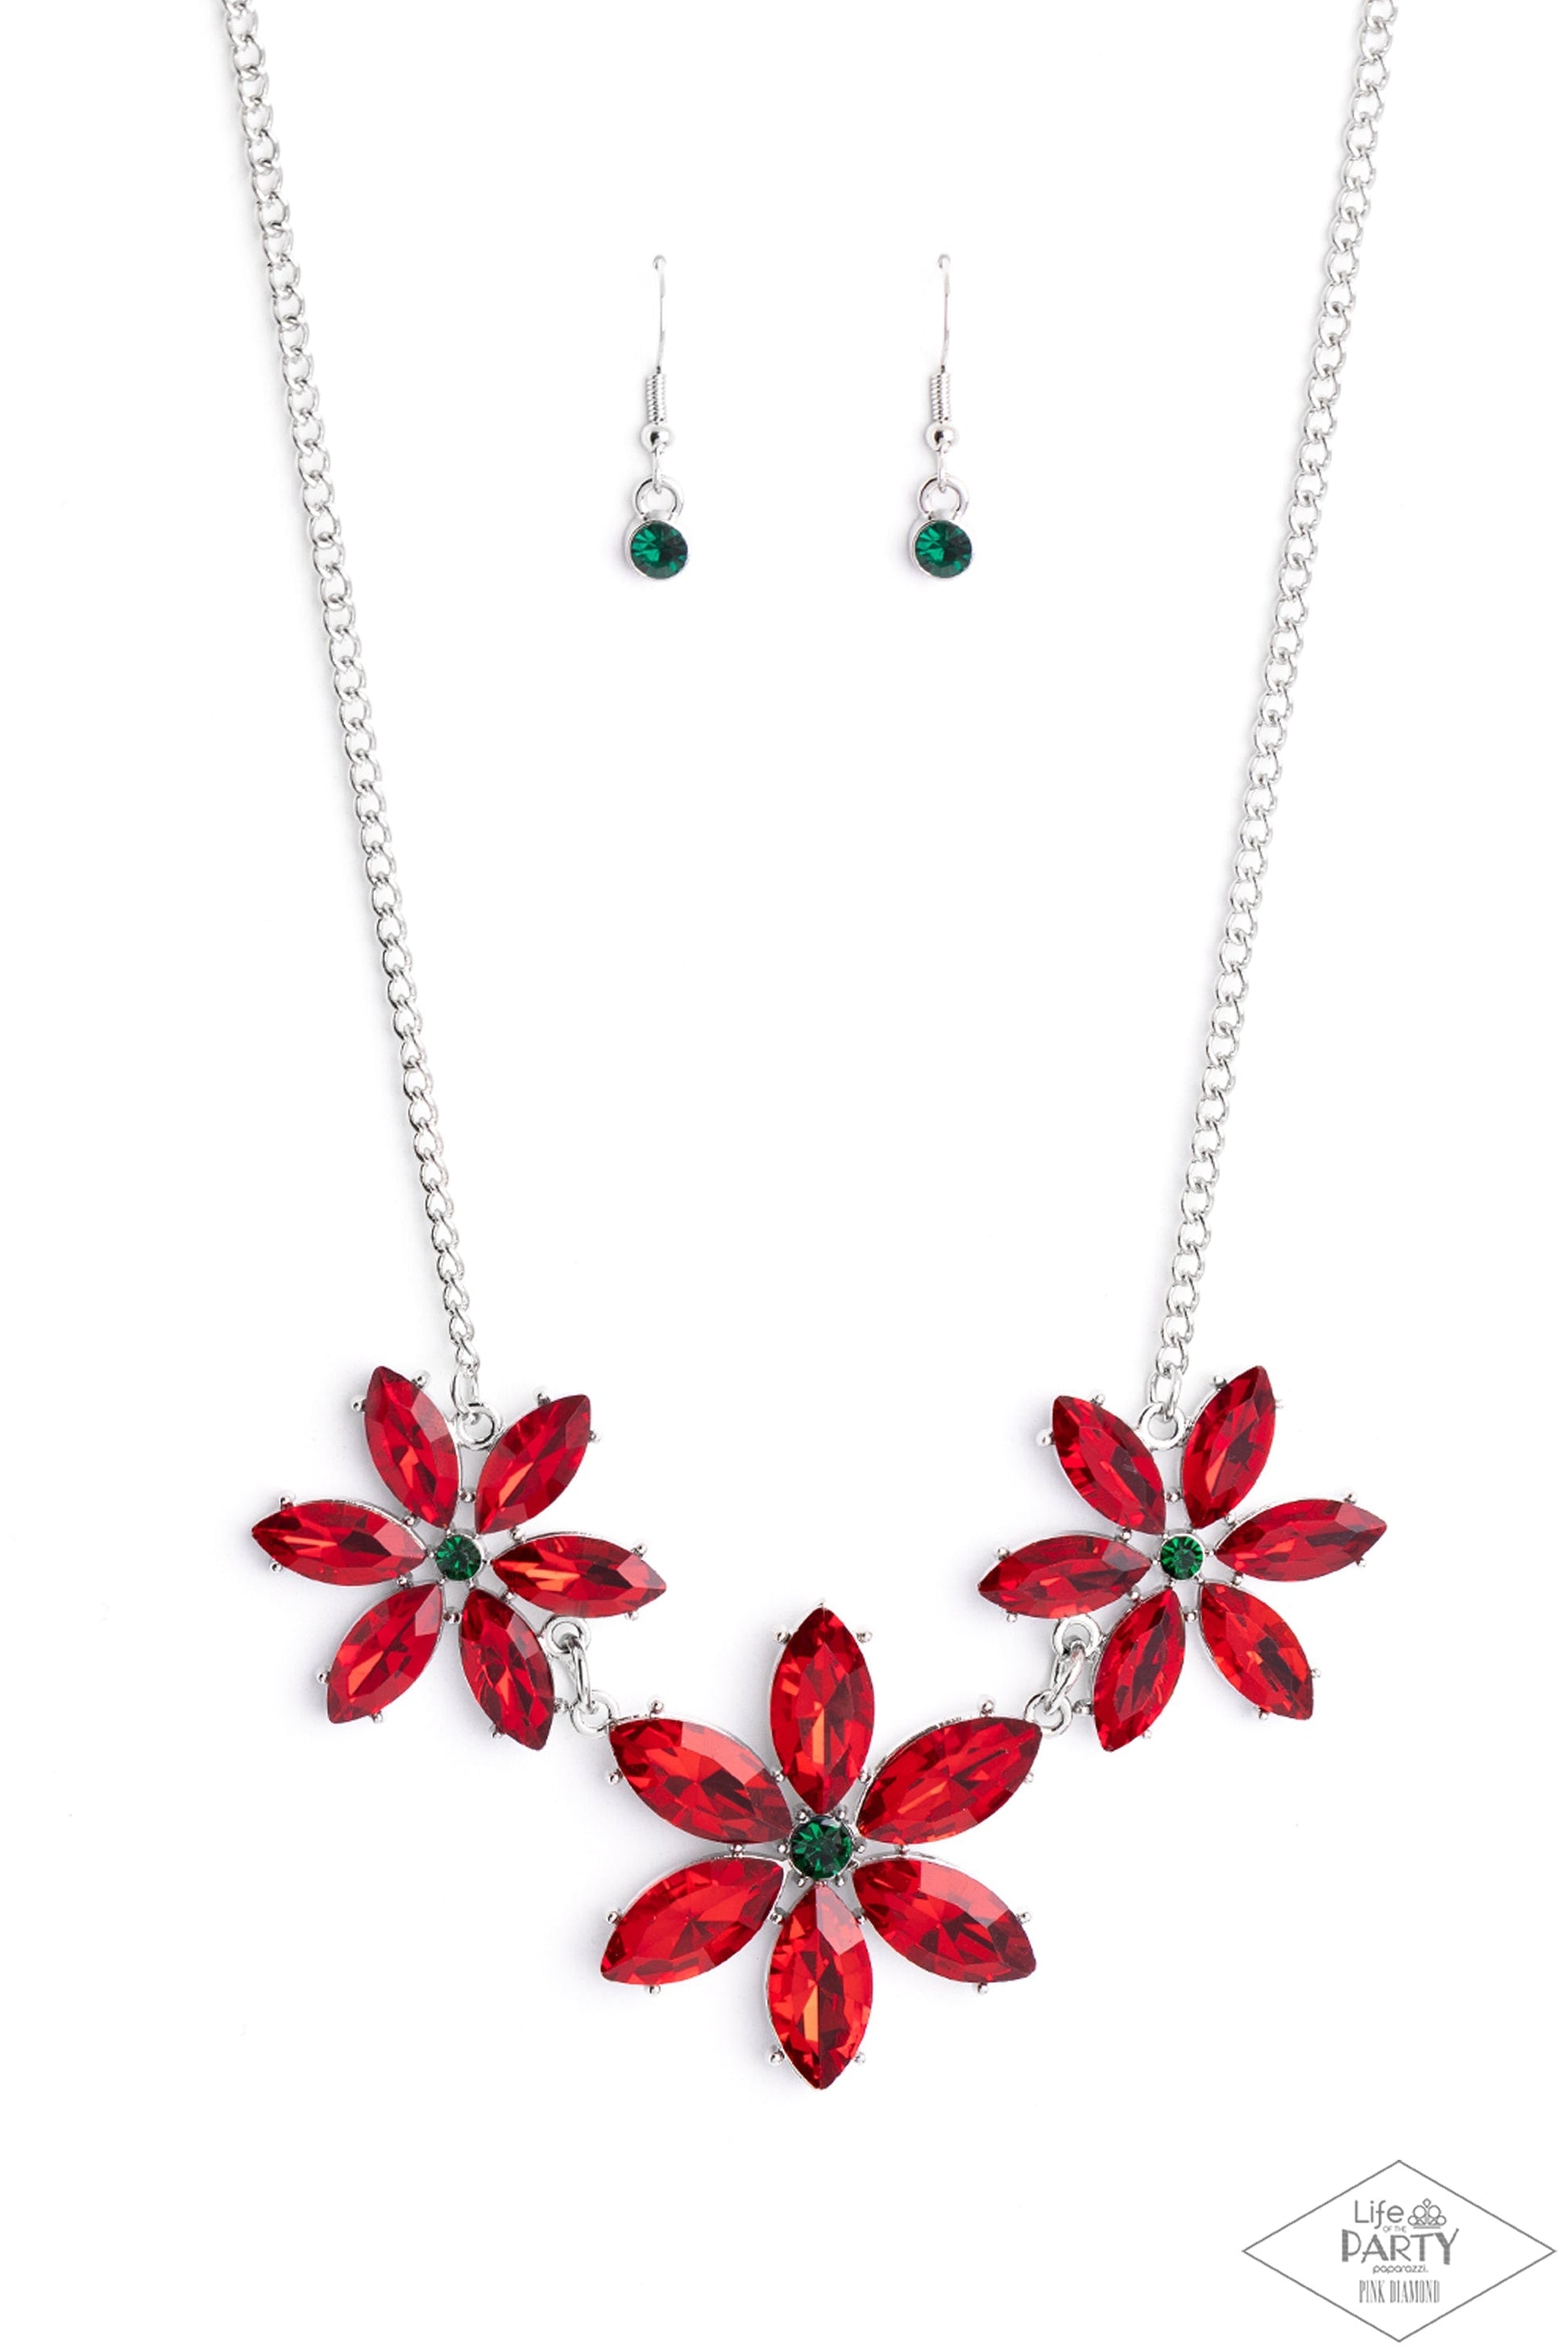 Meadow Muse - Red and Green Flower Necklace - Paparazzi Accessories - Rich red marquise cut rhinestones gather into whimsical flowers dotted with brilliant emerald rhinestone centers. The sparkling red gems are set in pronged settings and connect to a dainty silver chain creating a fanciful display across the collar.